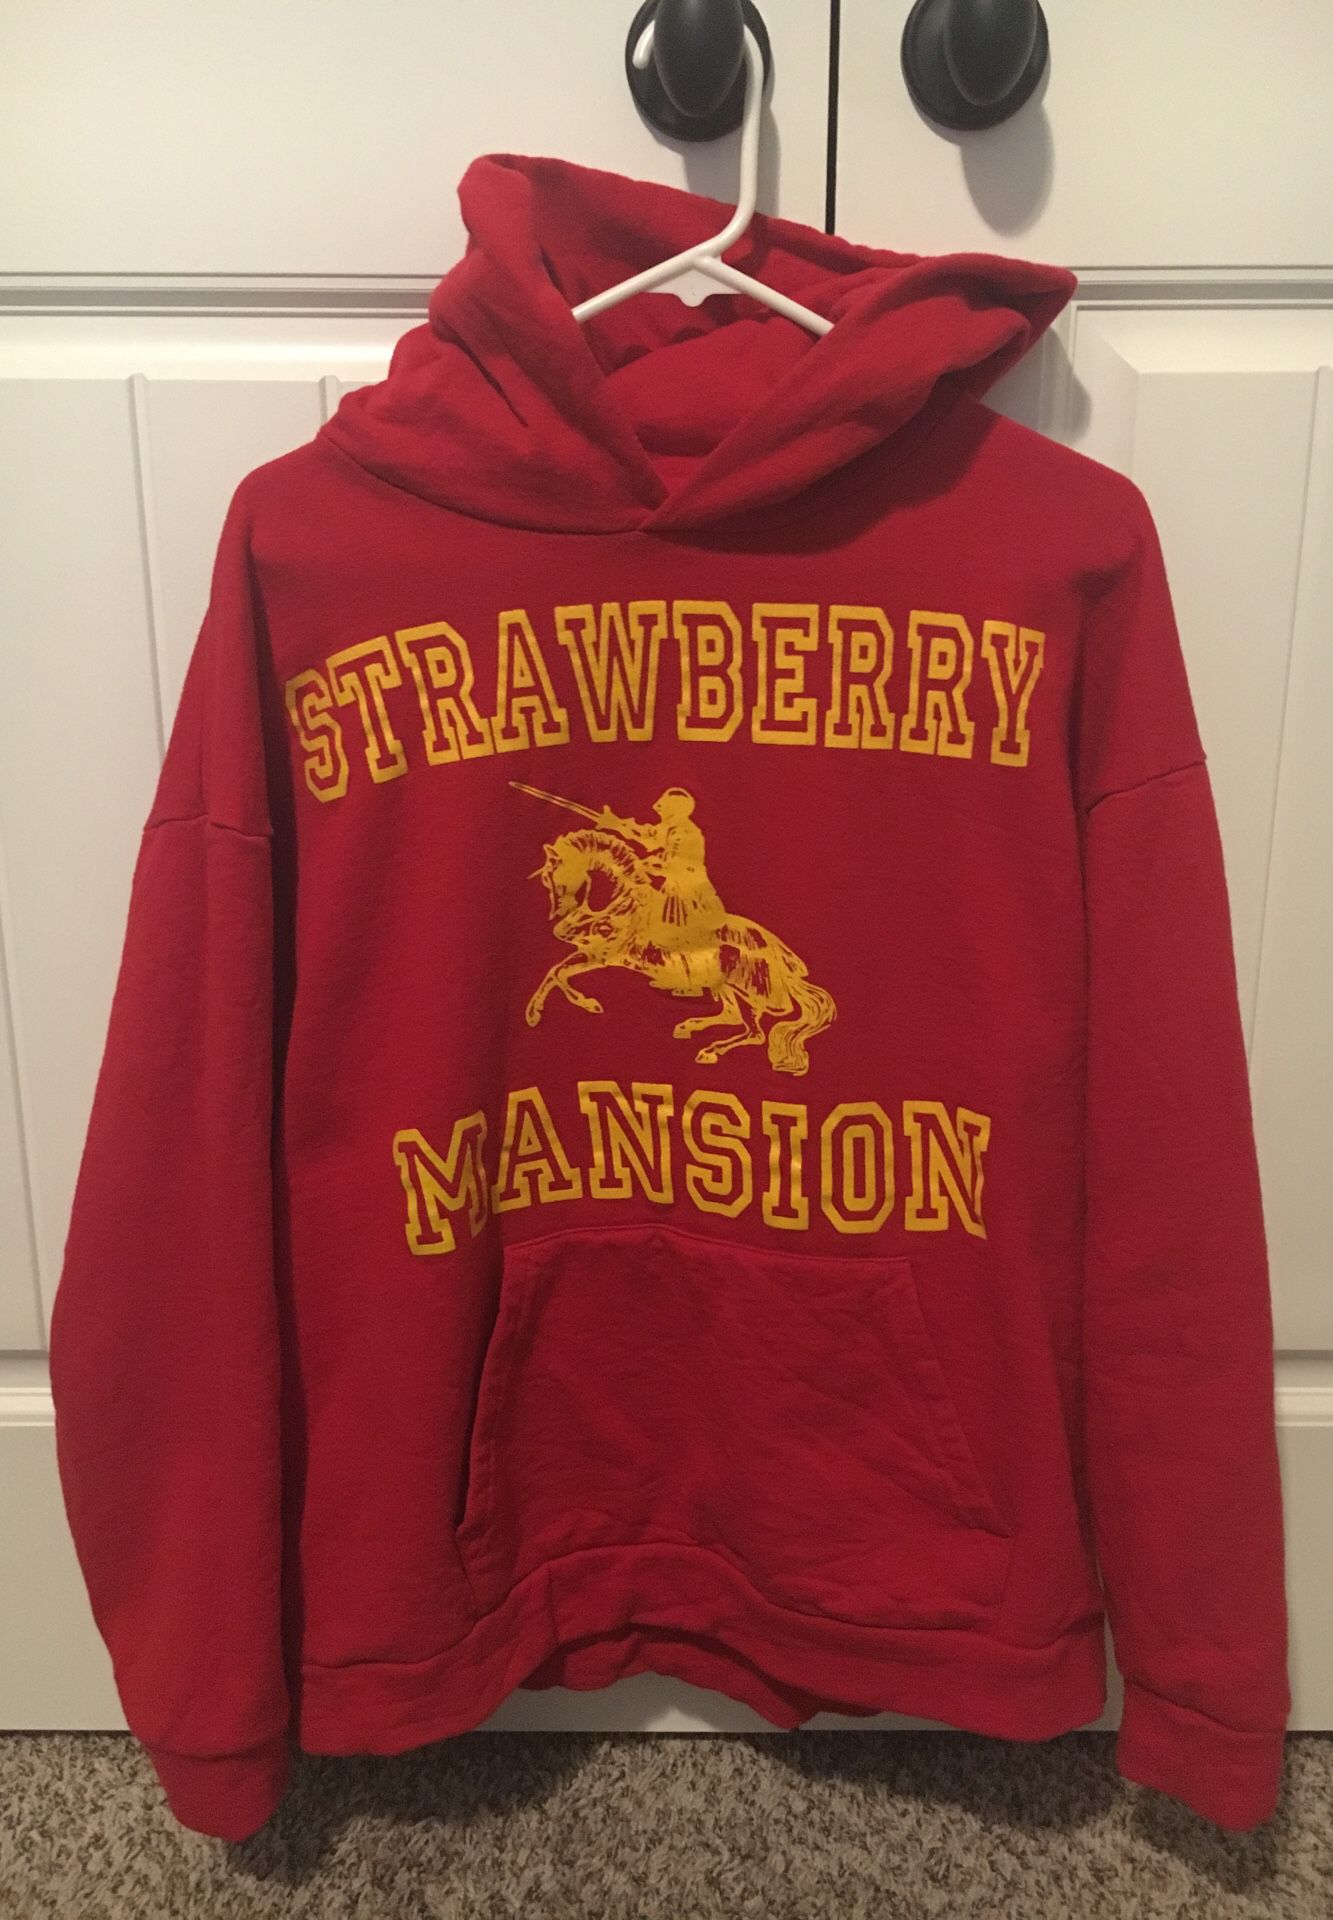 Strawberry Mansion hoodie Ian Connor revenge storm Virgil abloh the ten off white Unwanted size Large boxy fit